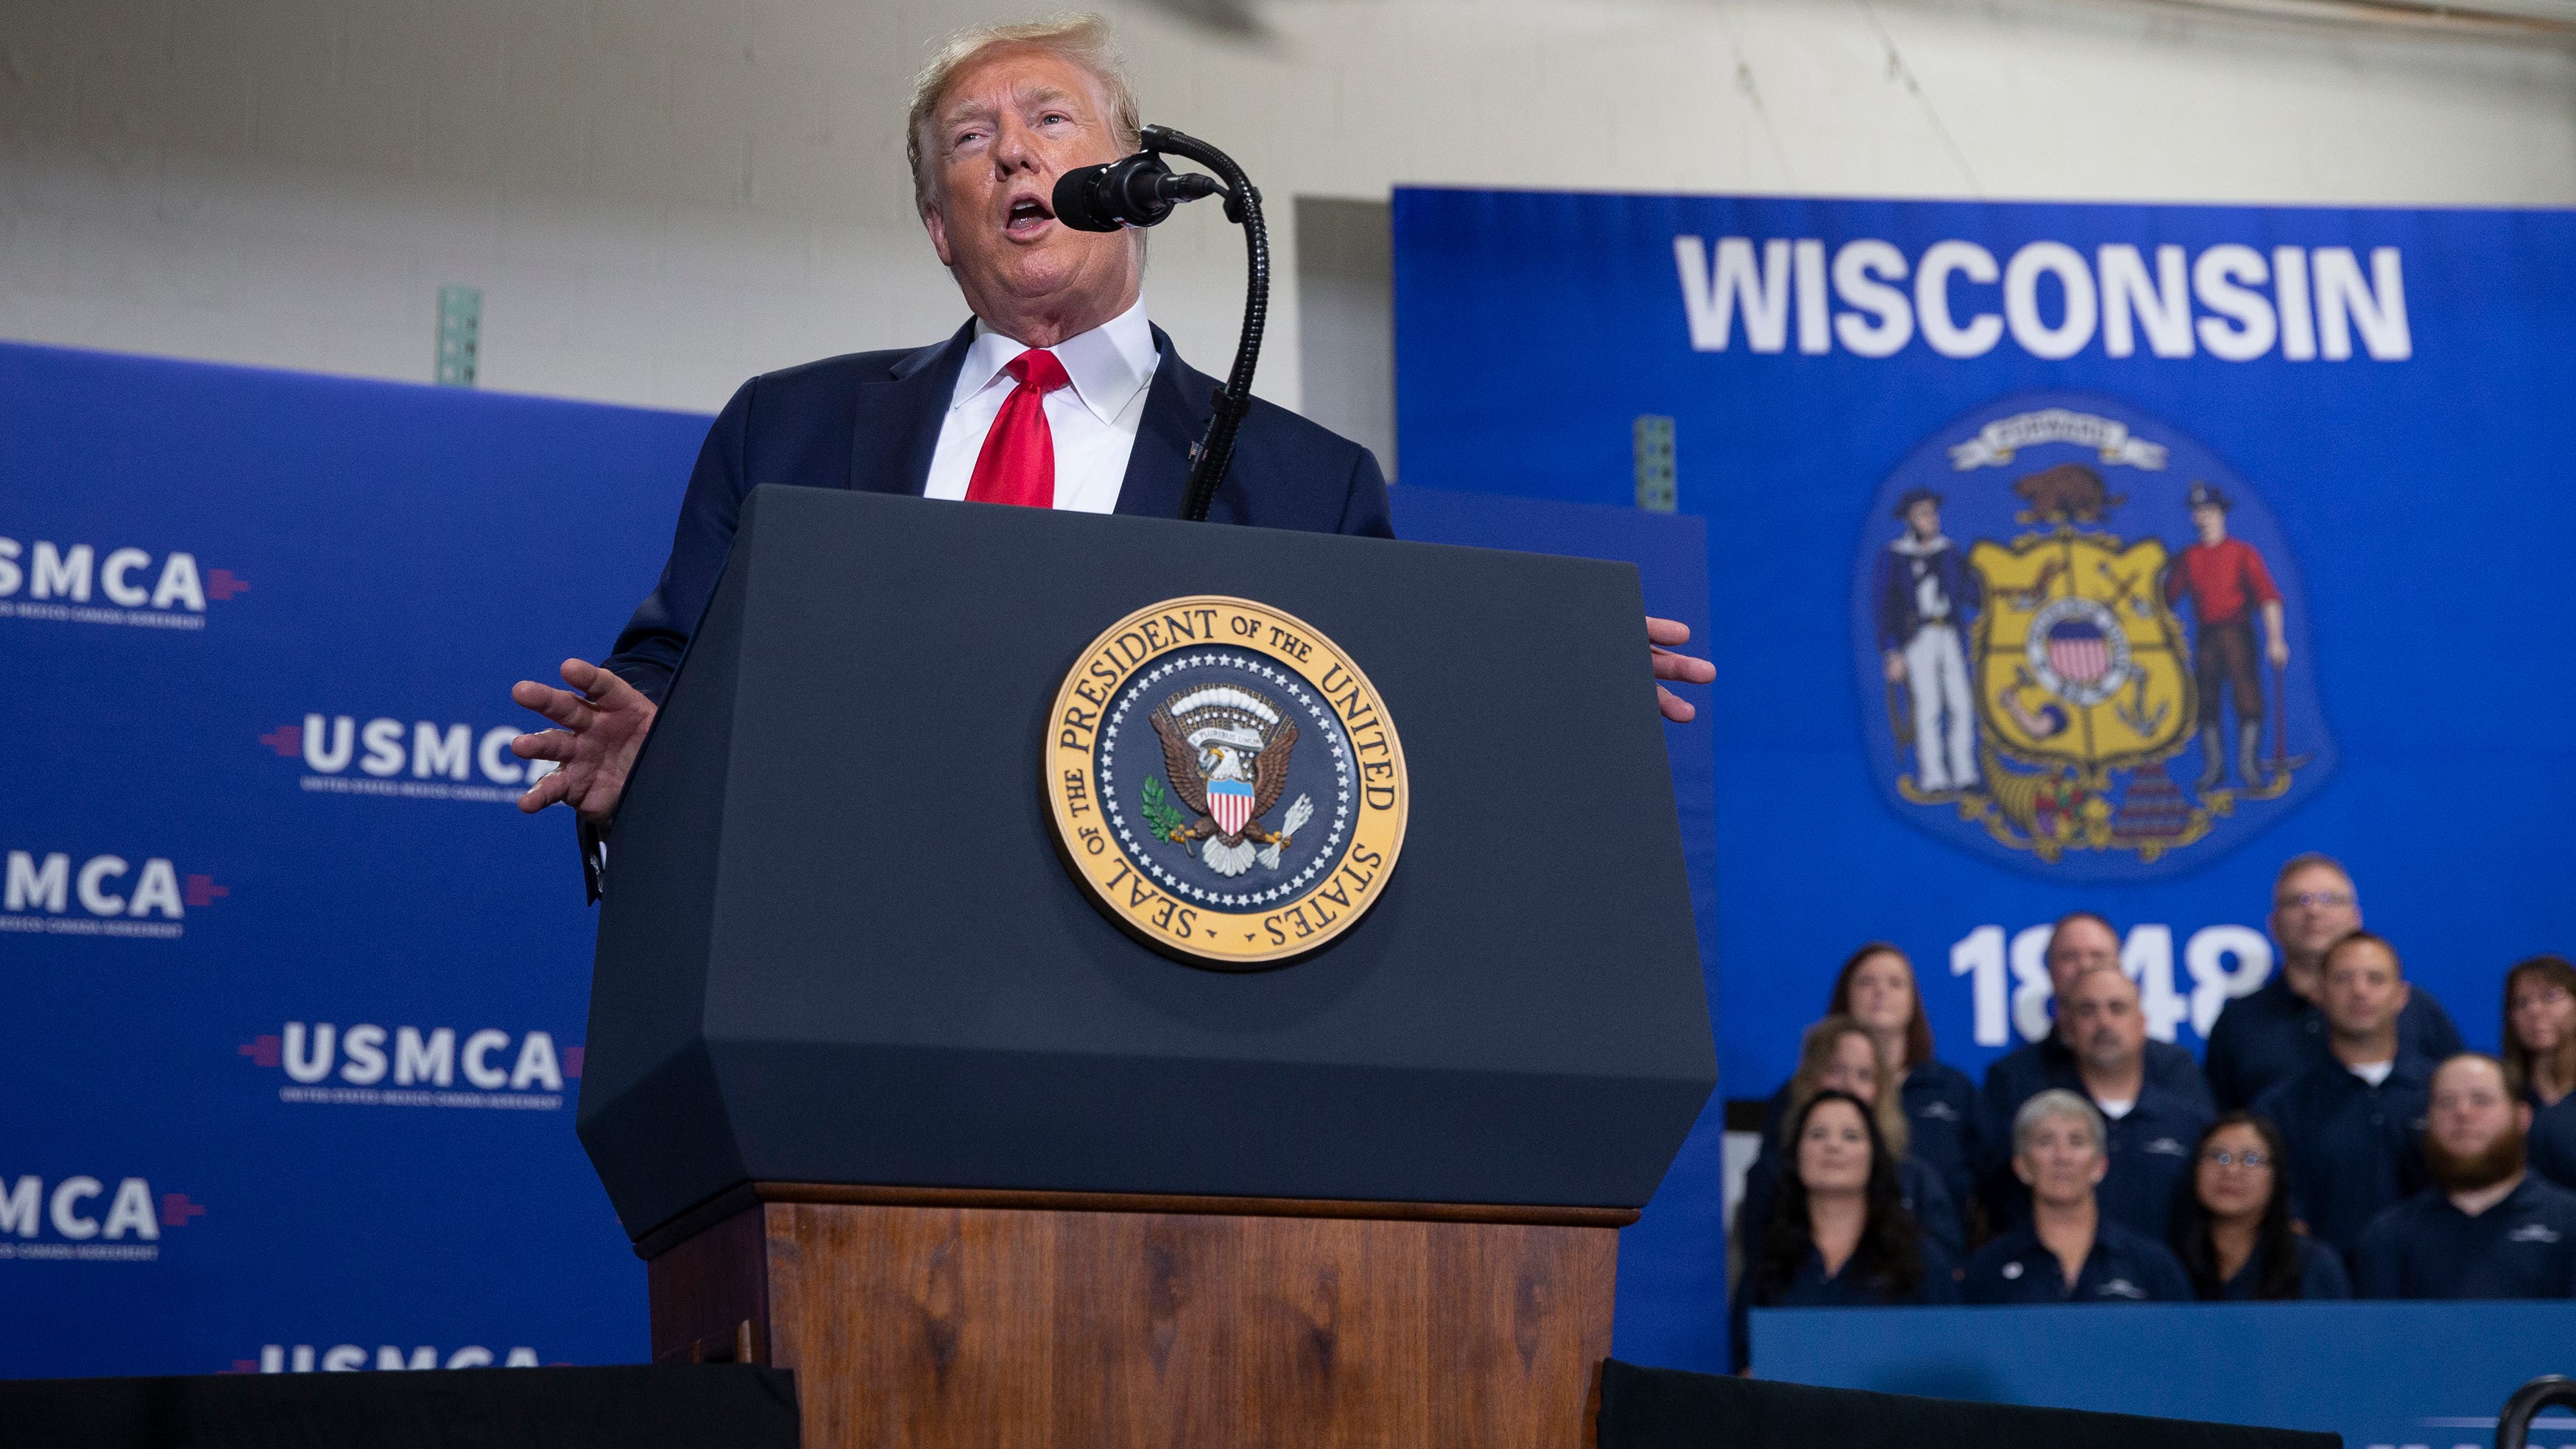 President DonaldTrump delivers a speech at Derco Aerospace in Milwaukee, Wisconsin, on Friday, July 12, 2019.